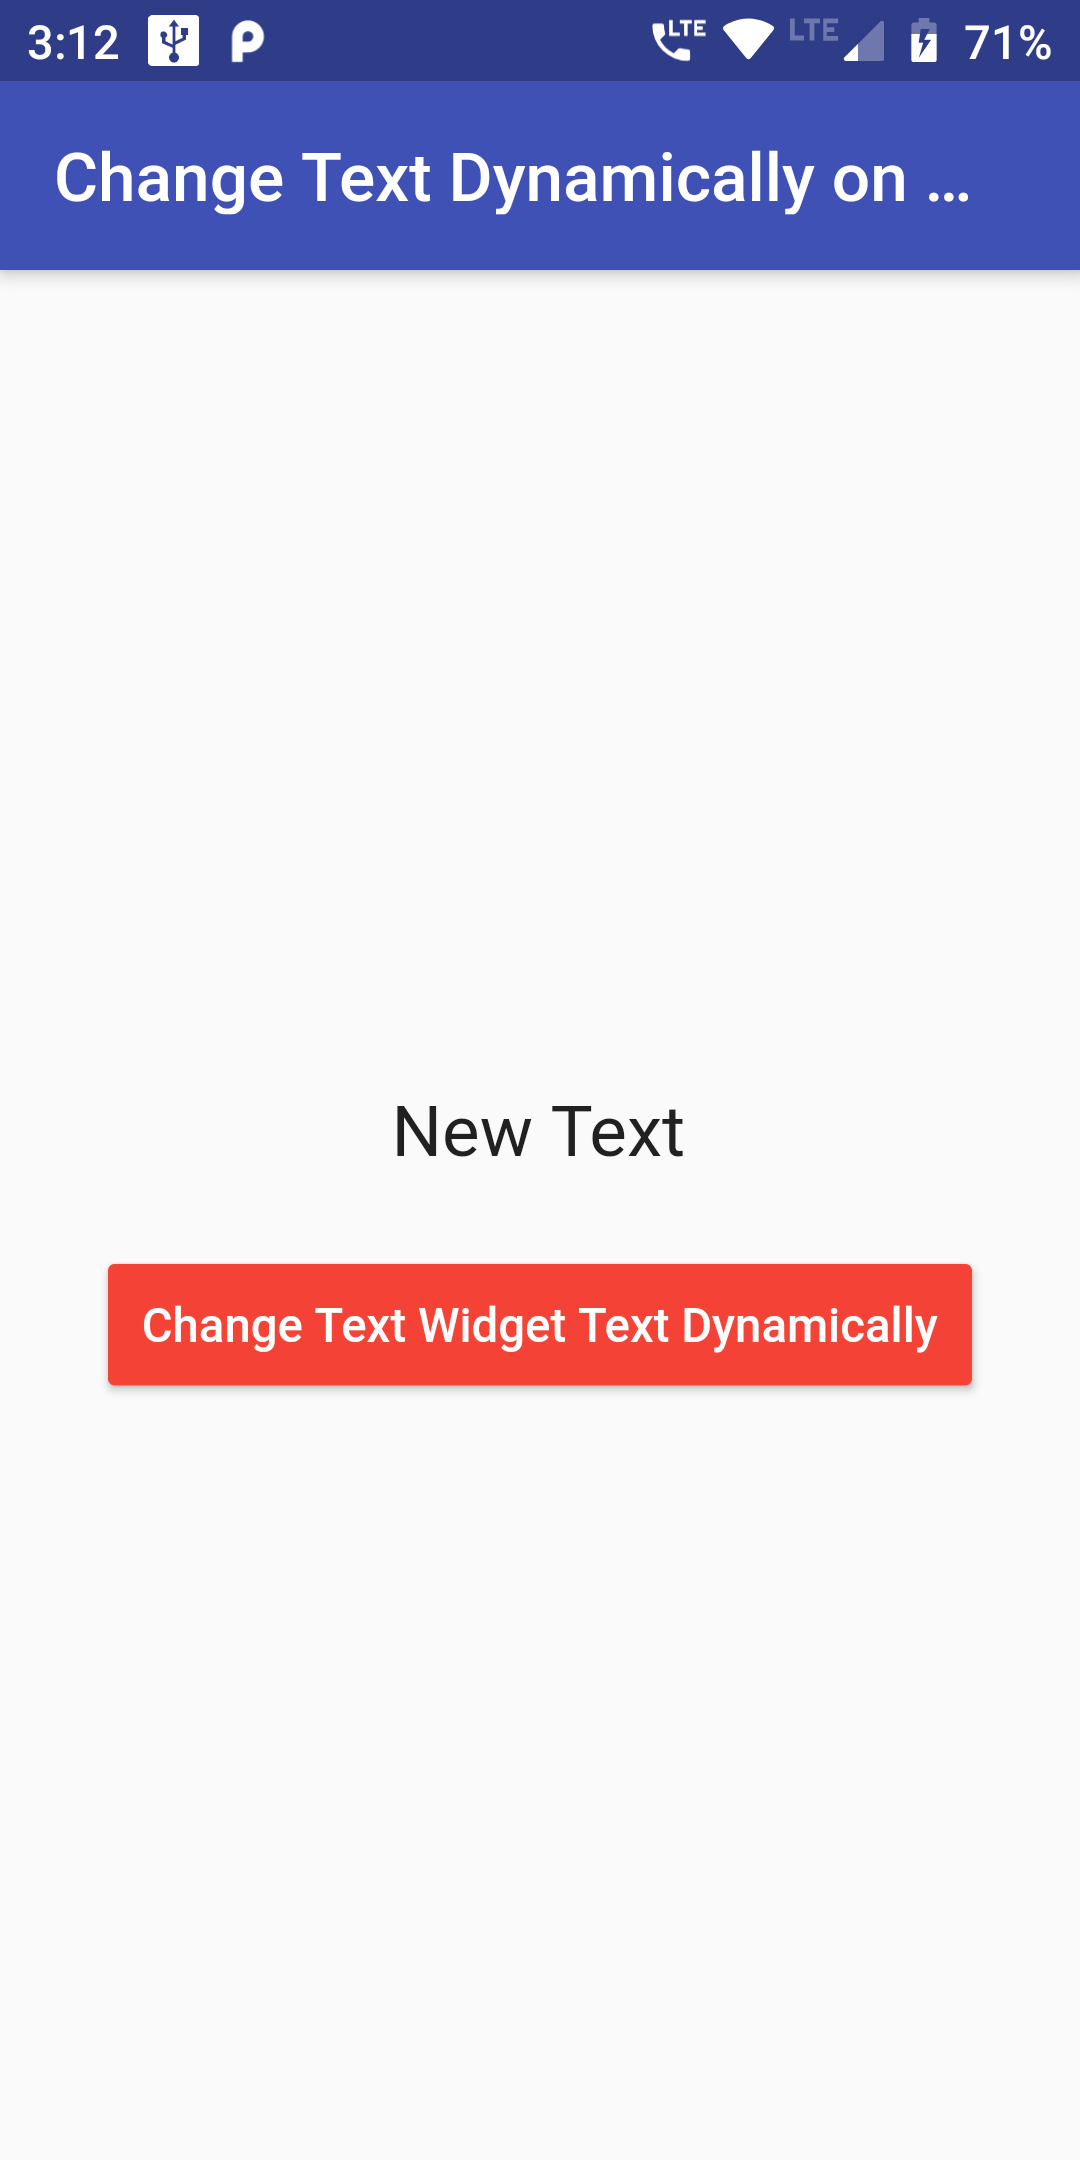 How To Change Text Dynamically On click Of Button In Flutter